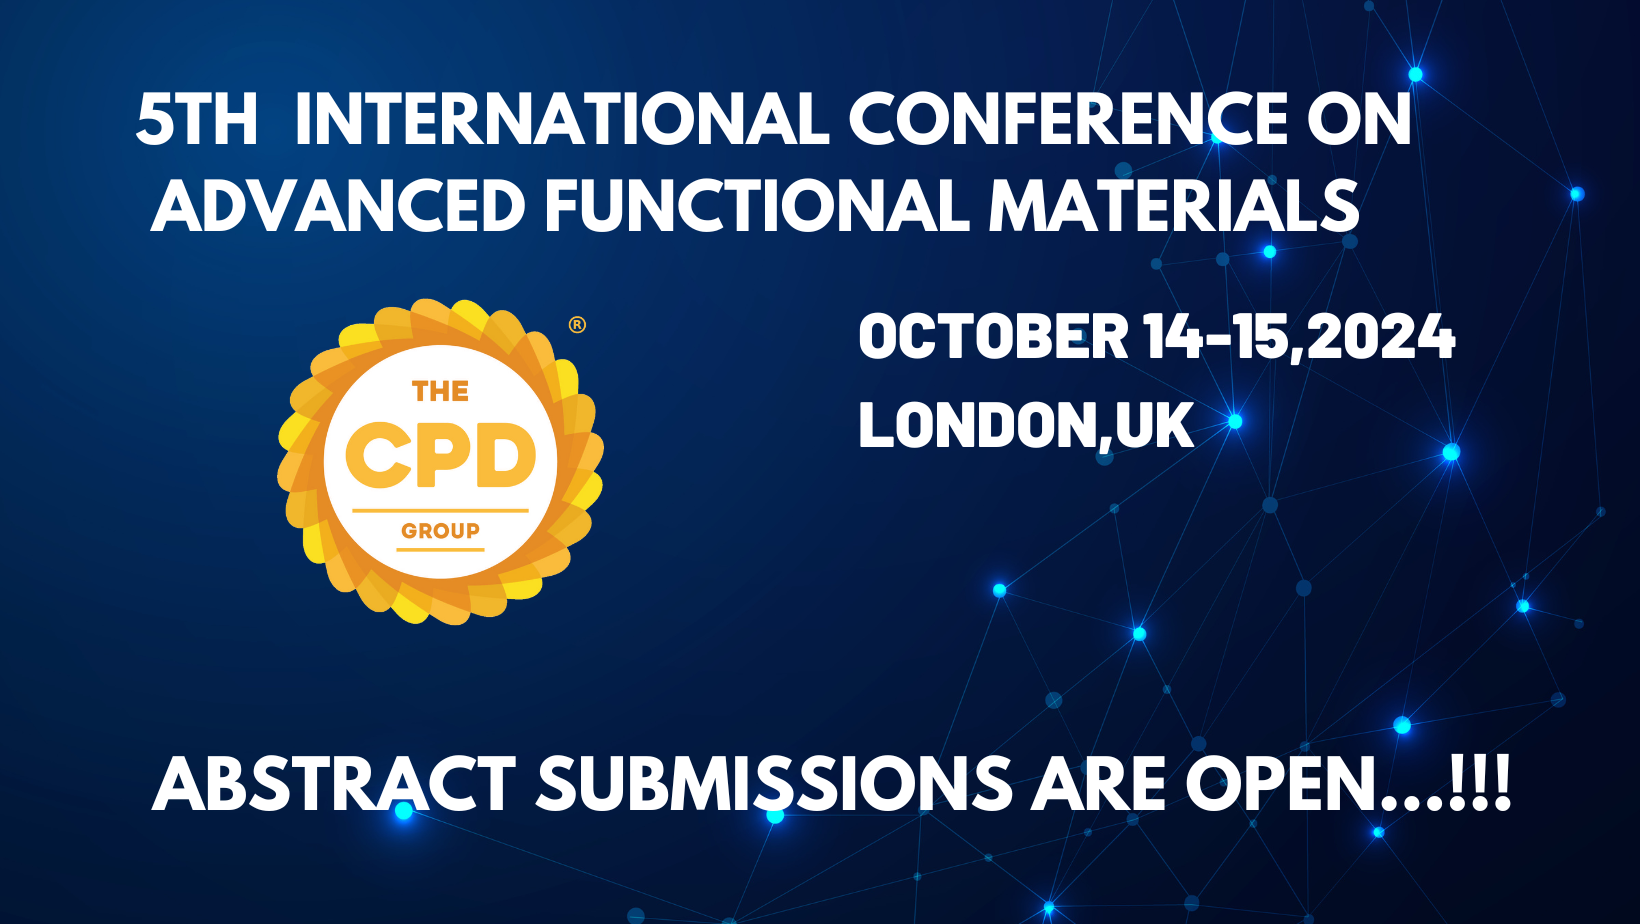 5th International Conference On Advanced Functional Materials, London,UK,London,United Kingdom